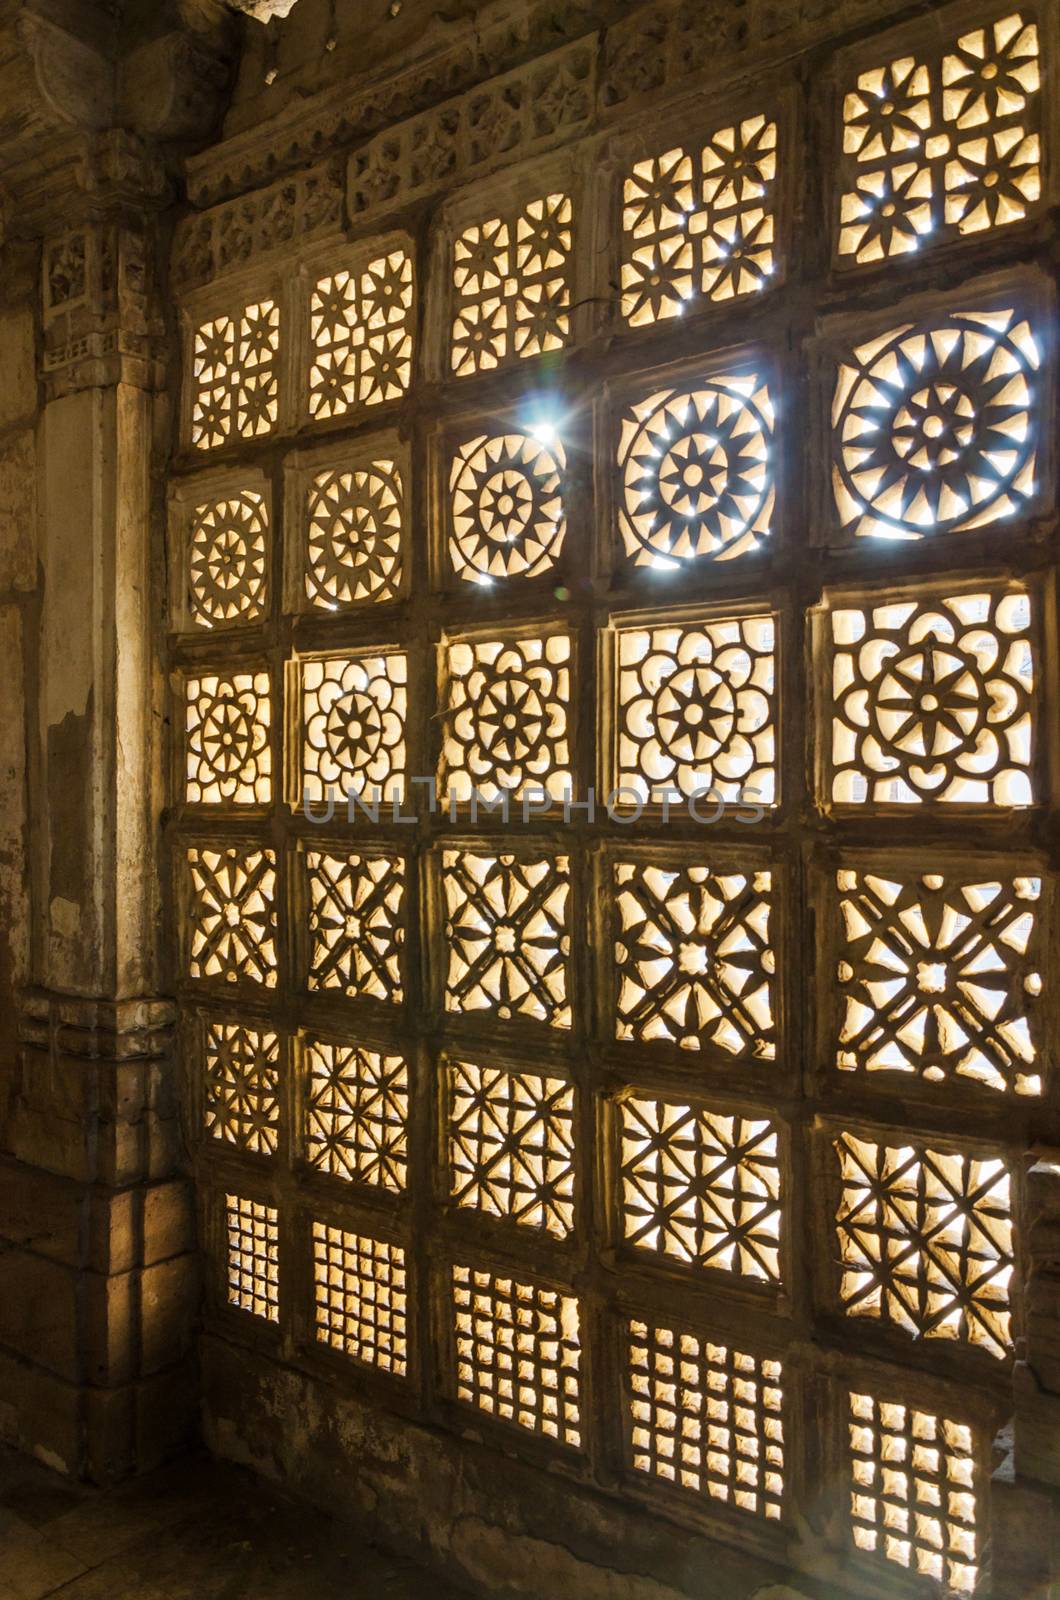 Carved stone grilles pattern at Sarkhej Roza mosque in Ahmedabad by siraanamwong